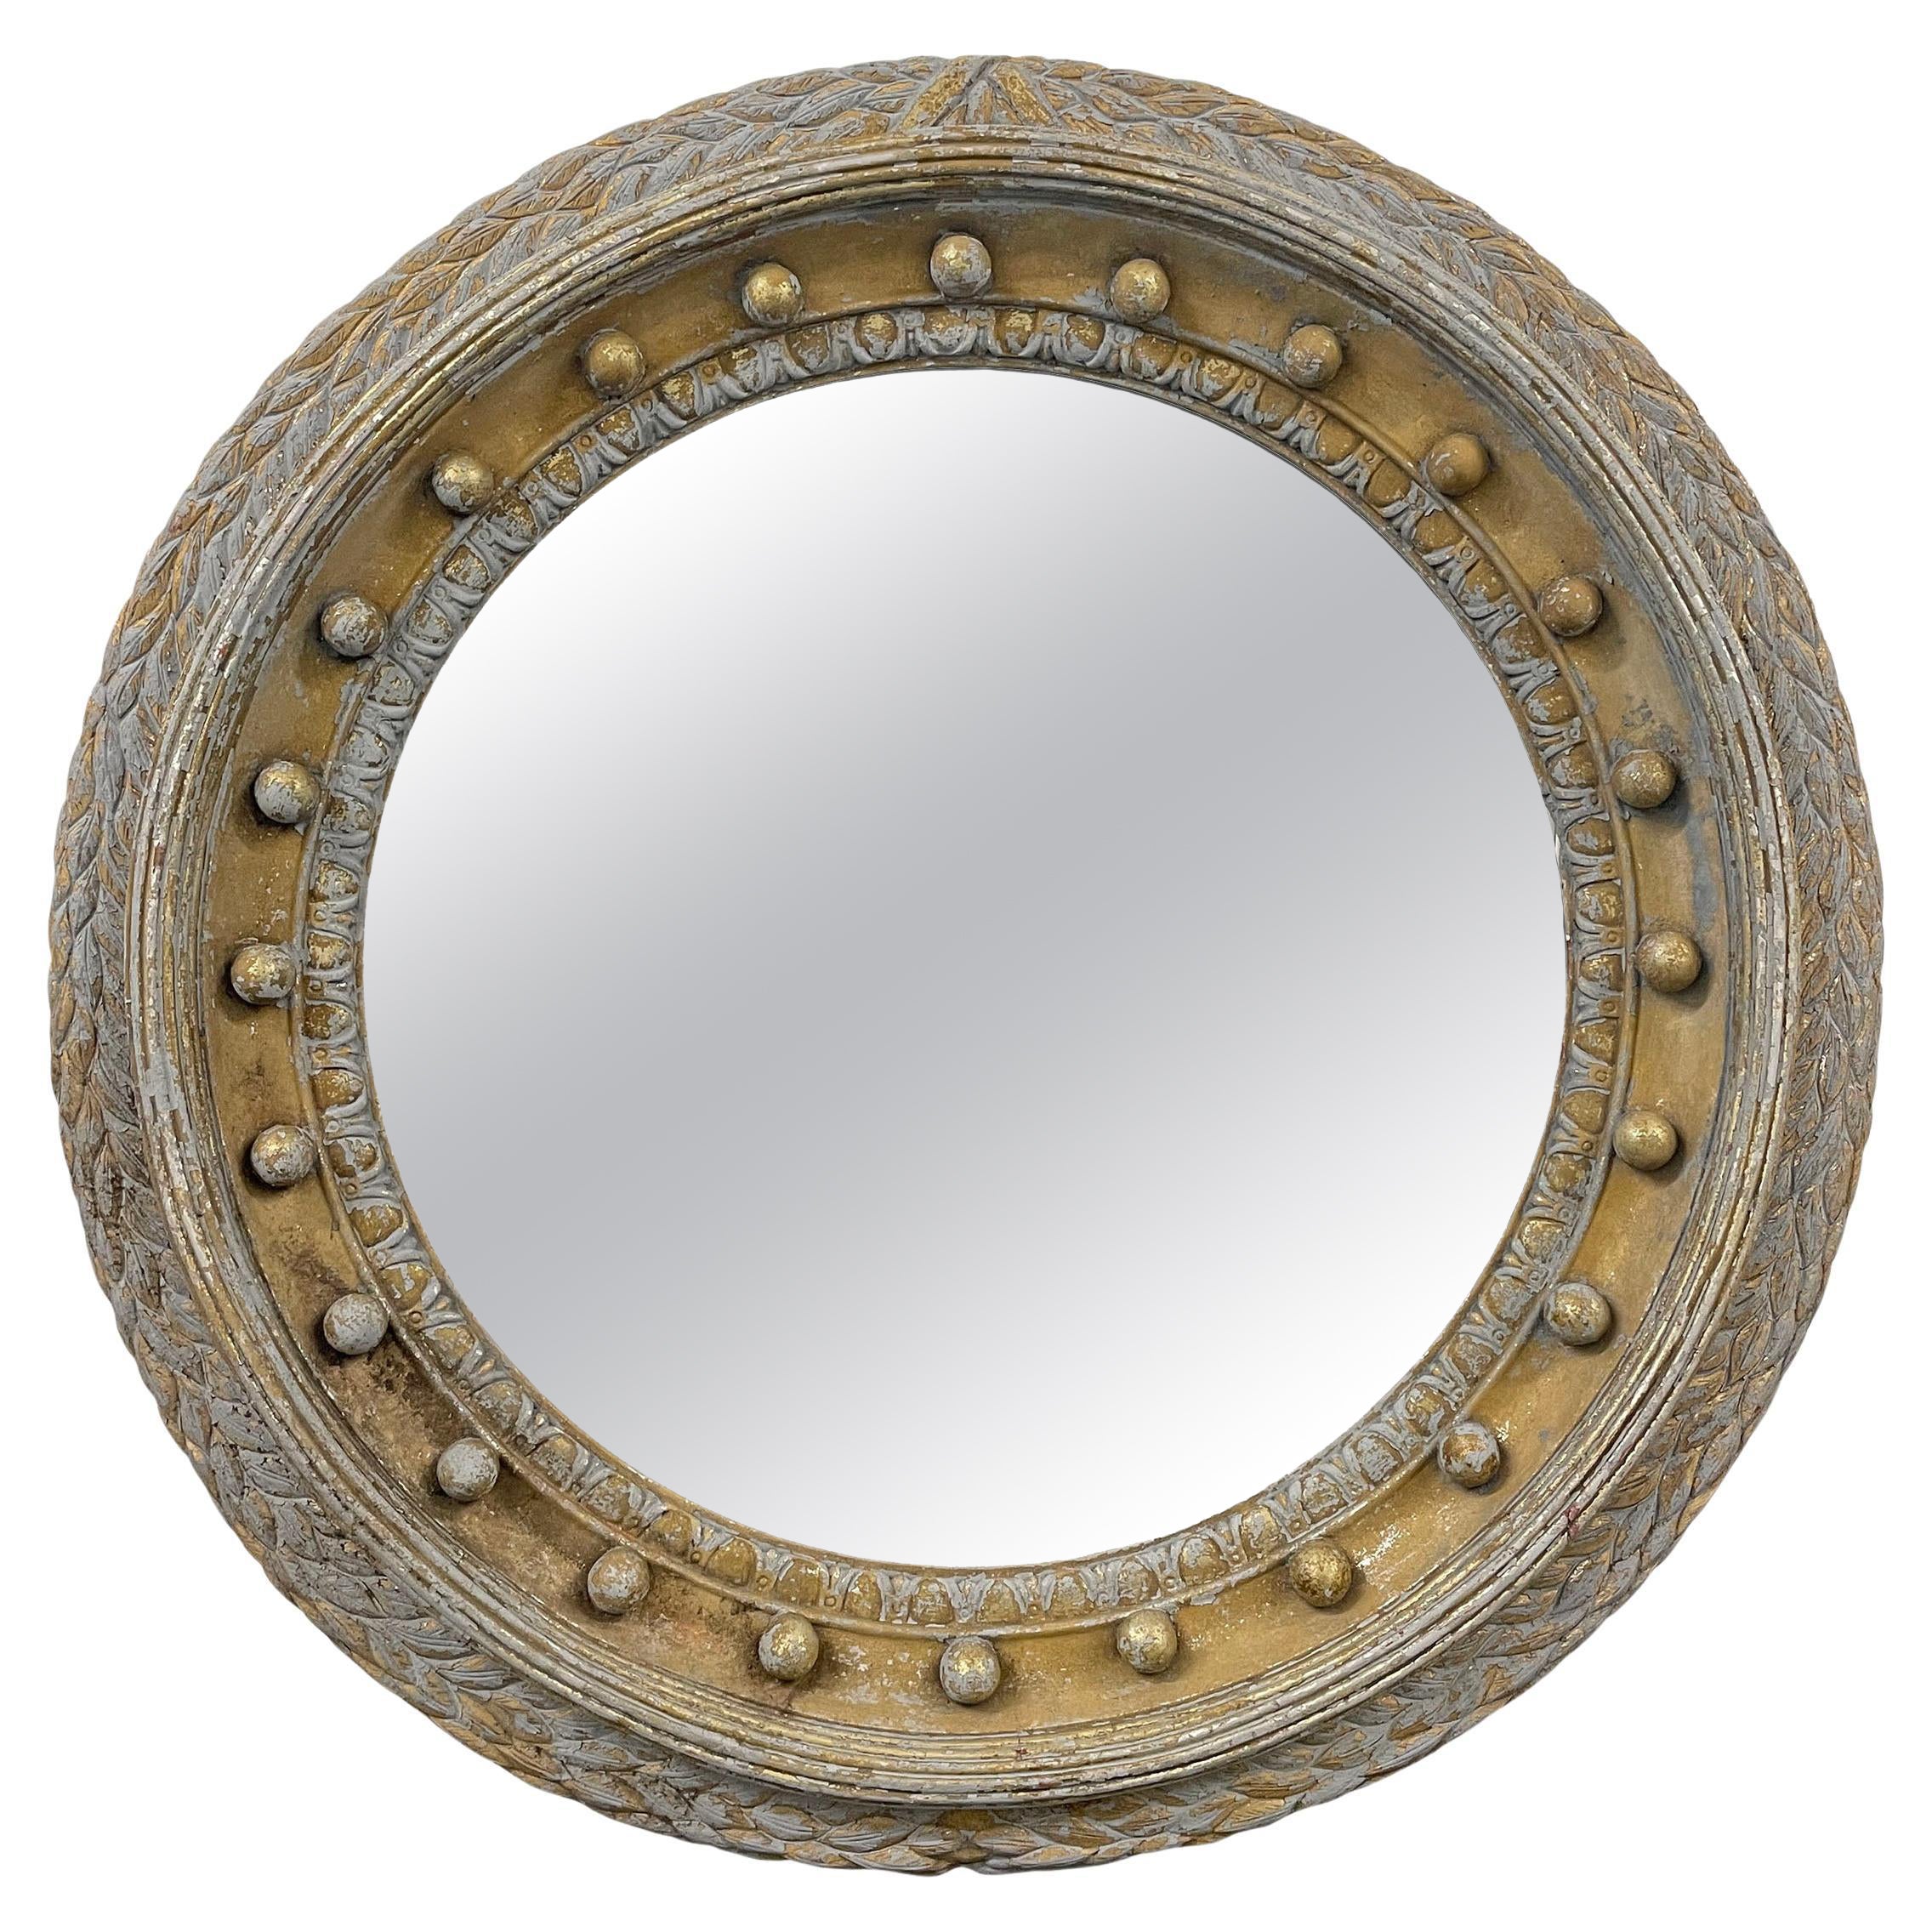 Massive Georgian-Inspired Gilt and Painted Framed Round Mirror For Sale